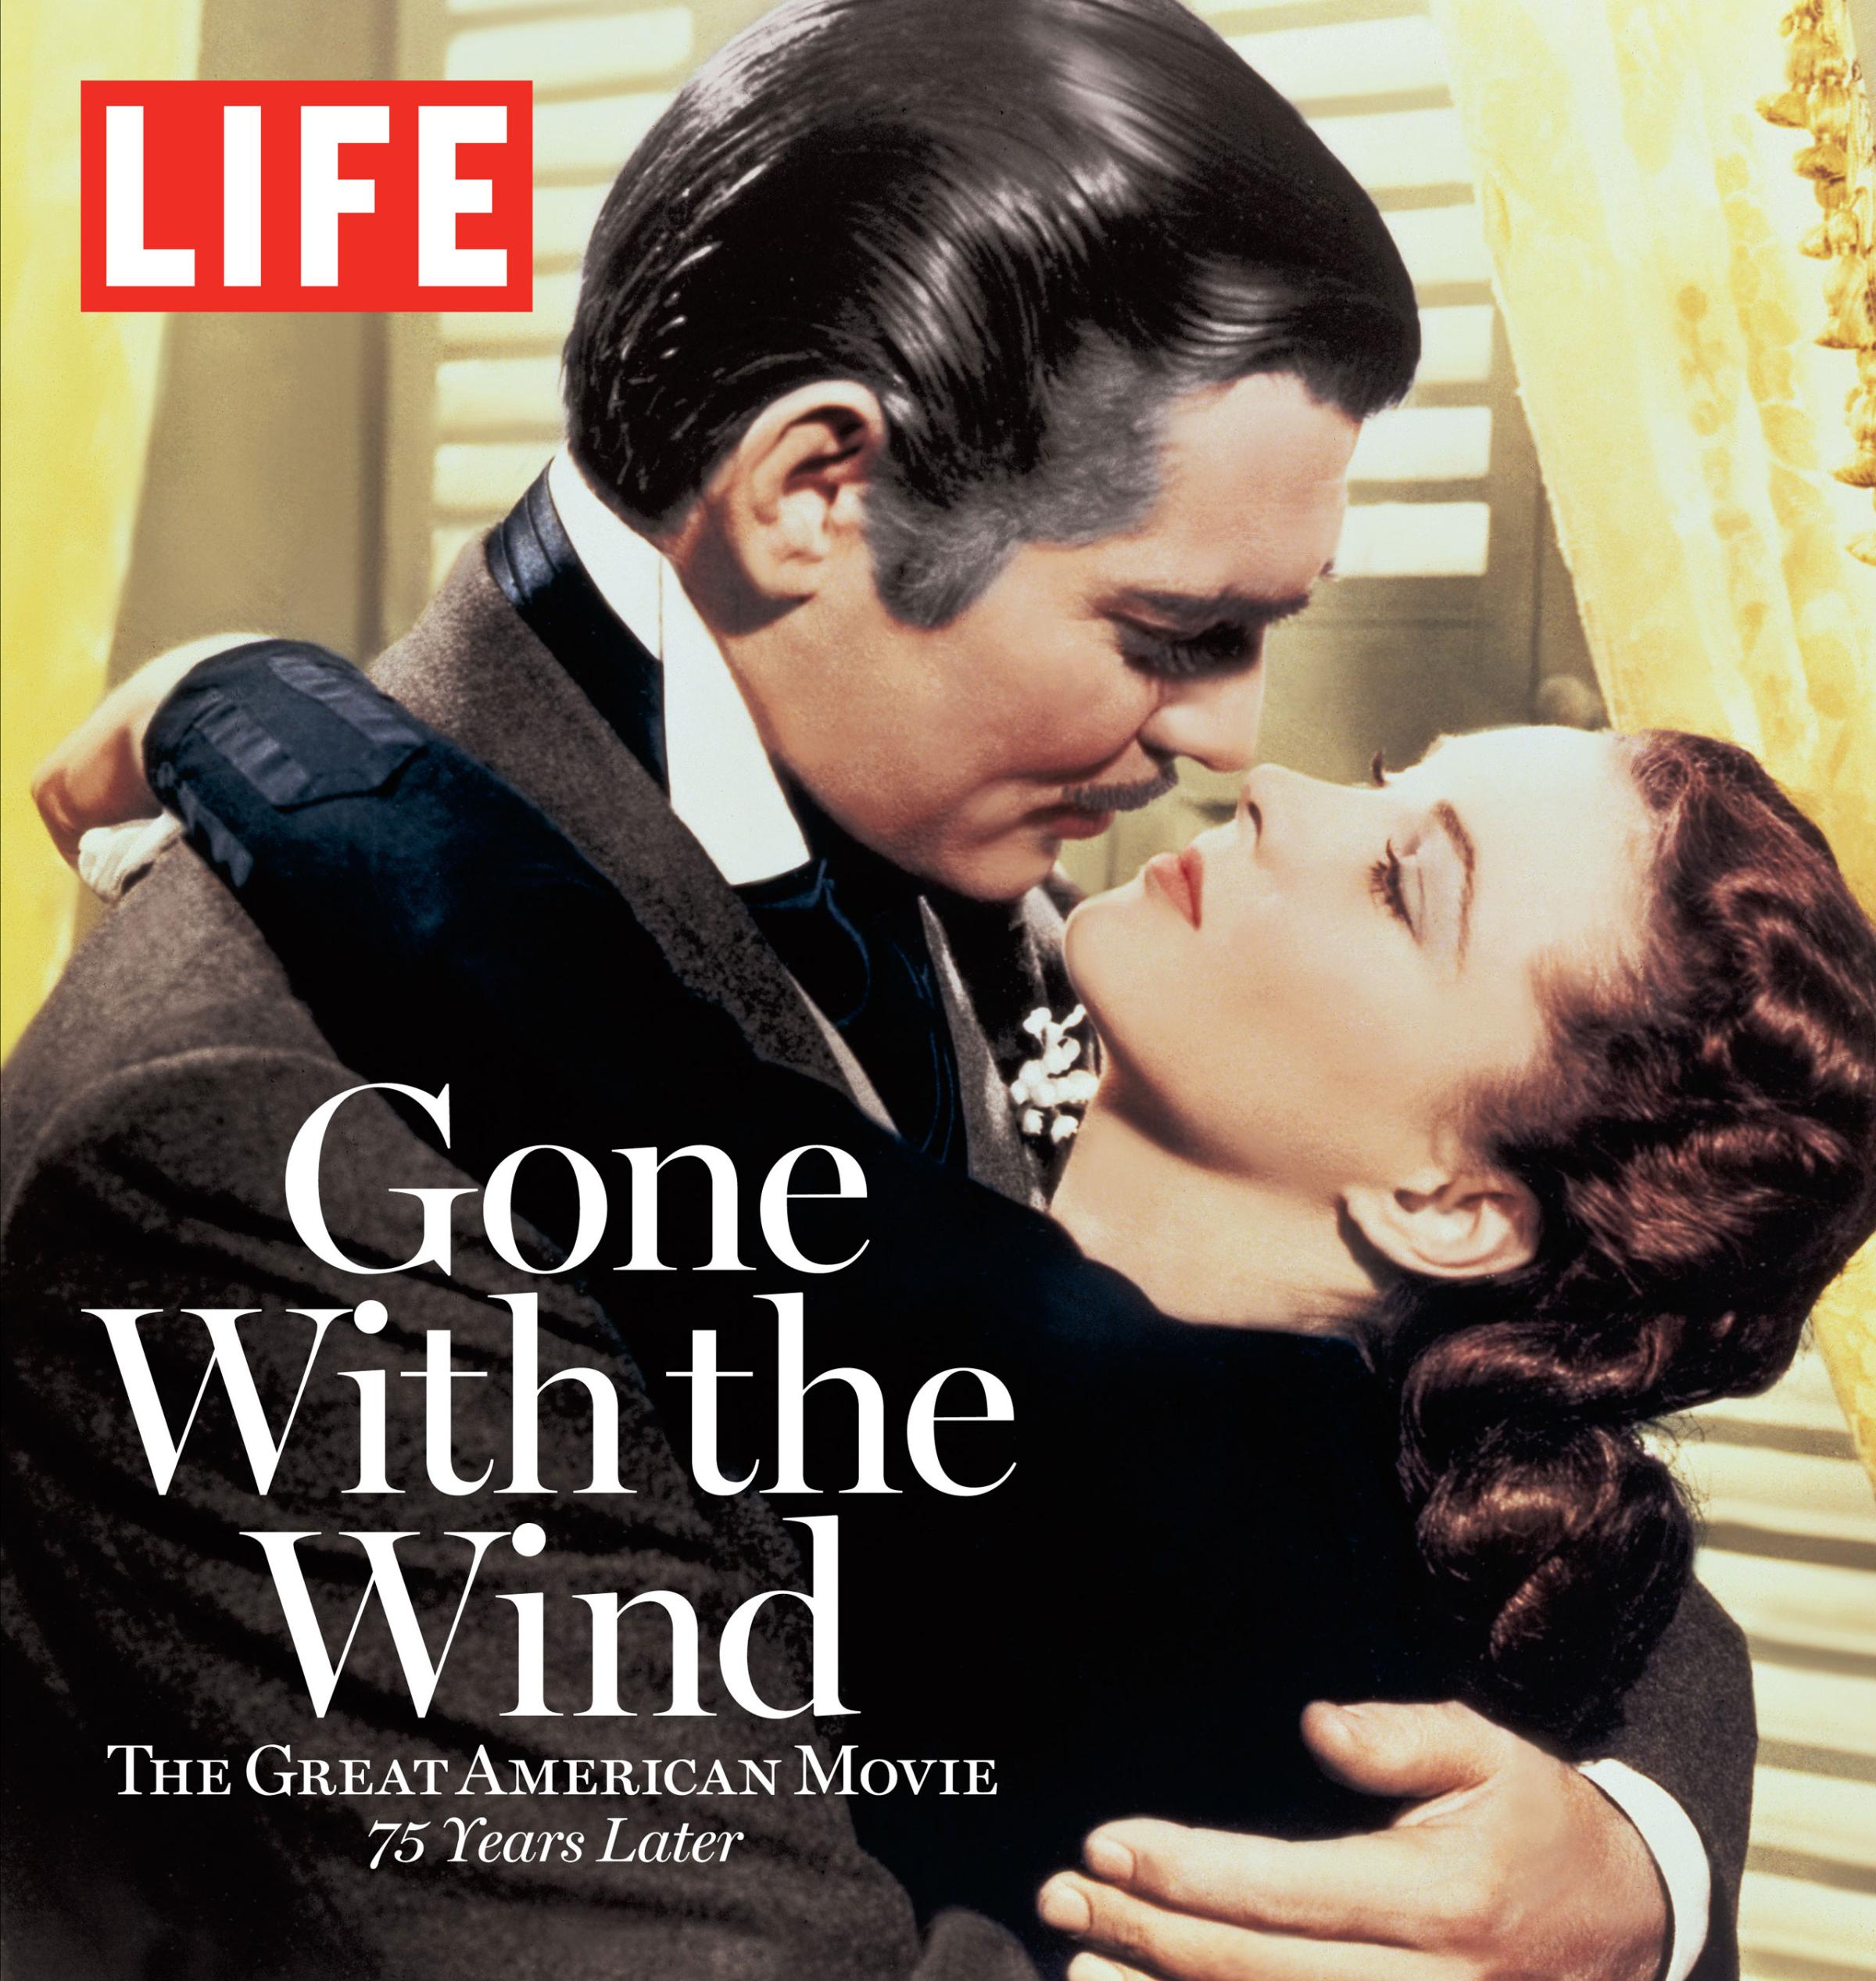 Gone with the Wind: The Great American Movie 75 Years later book jacket